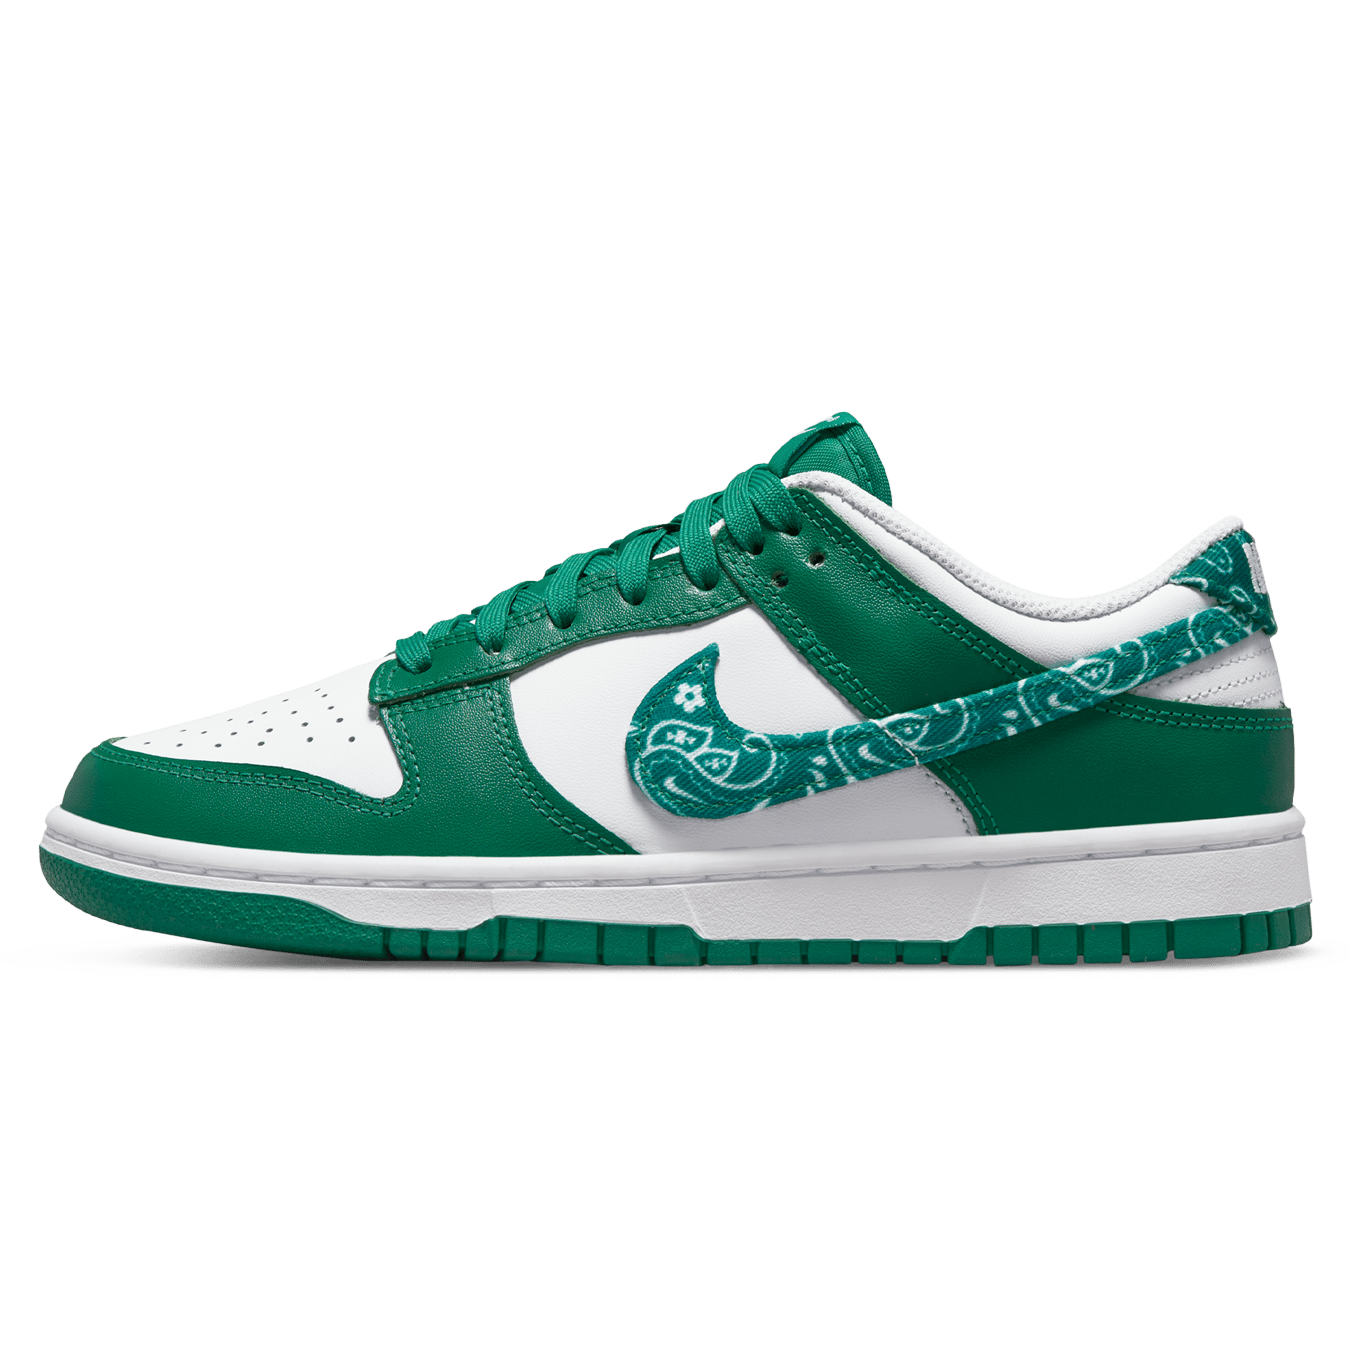 Nike Dunk Low Wmns Green Paisley DH4401 102